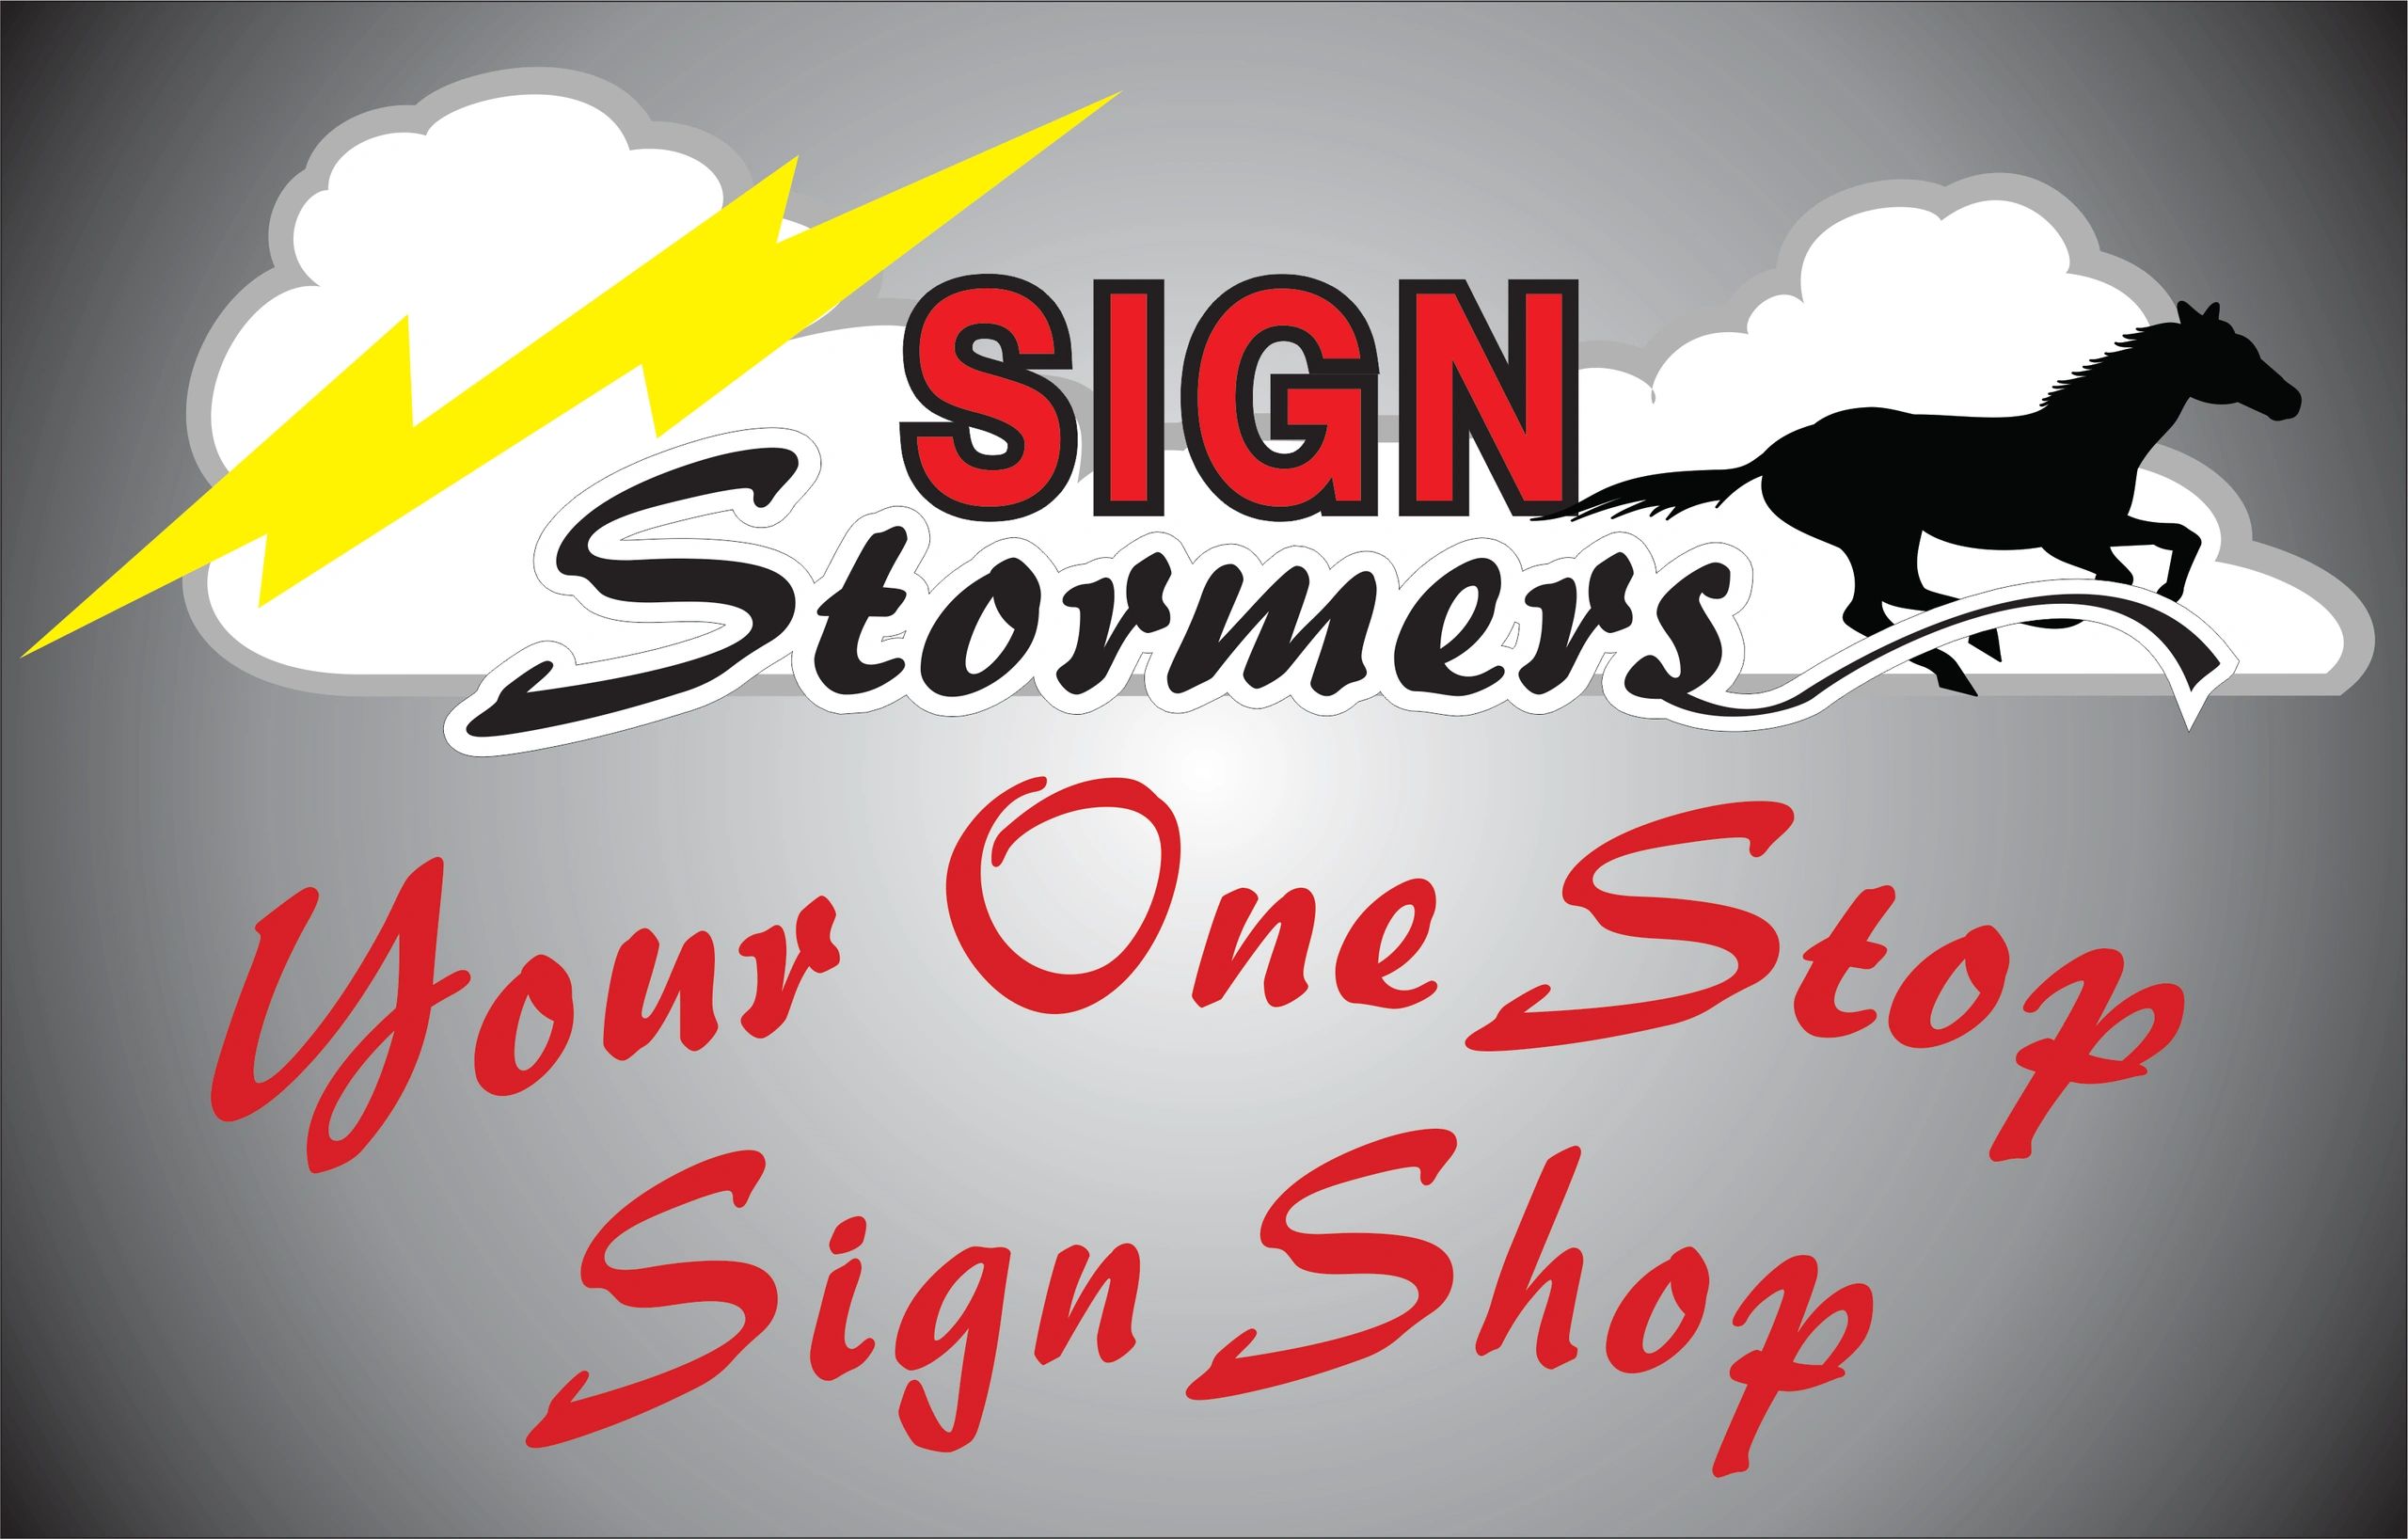 Sign Stormers